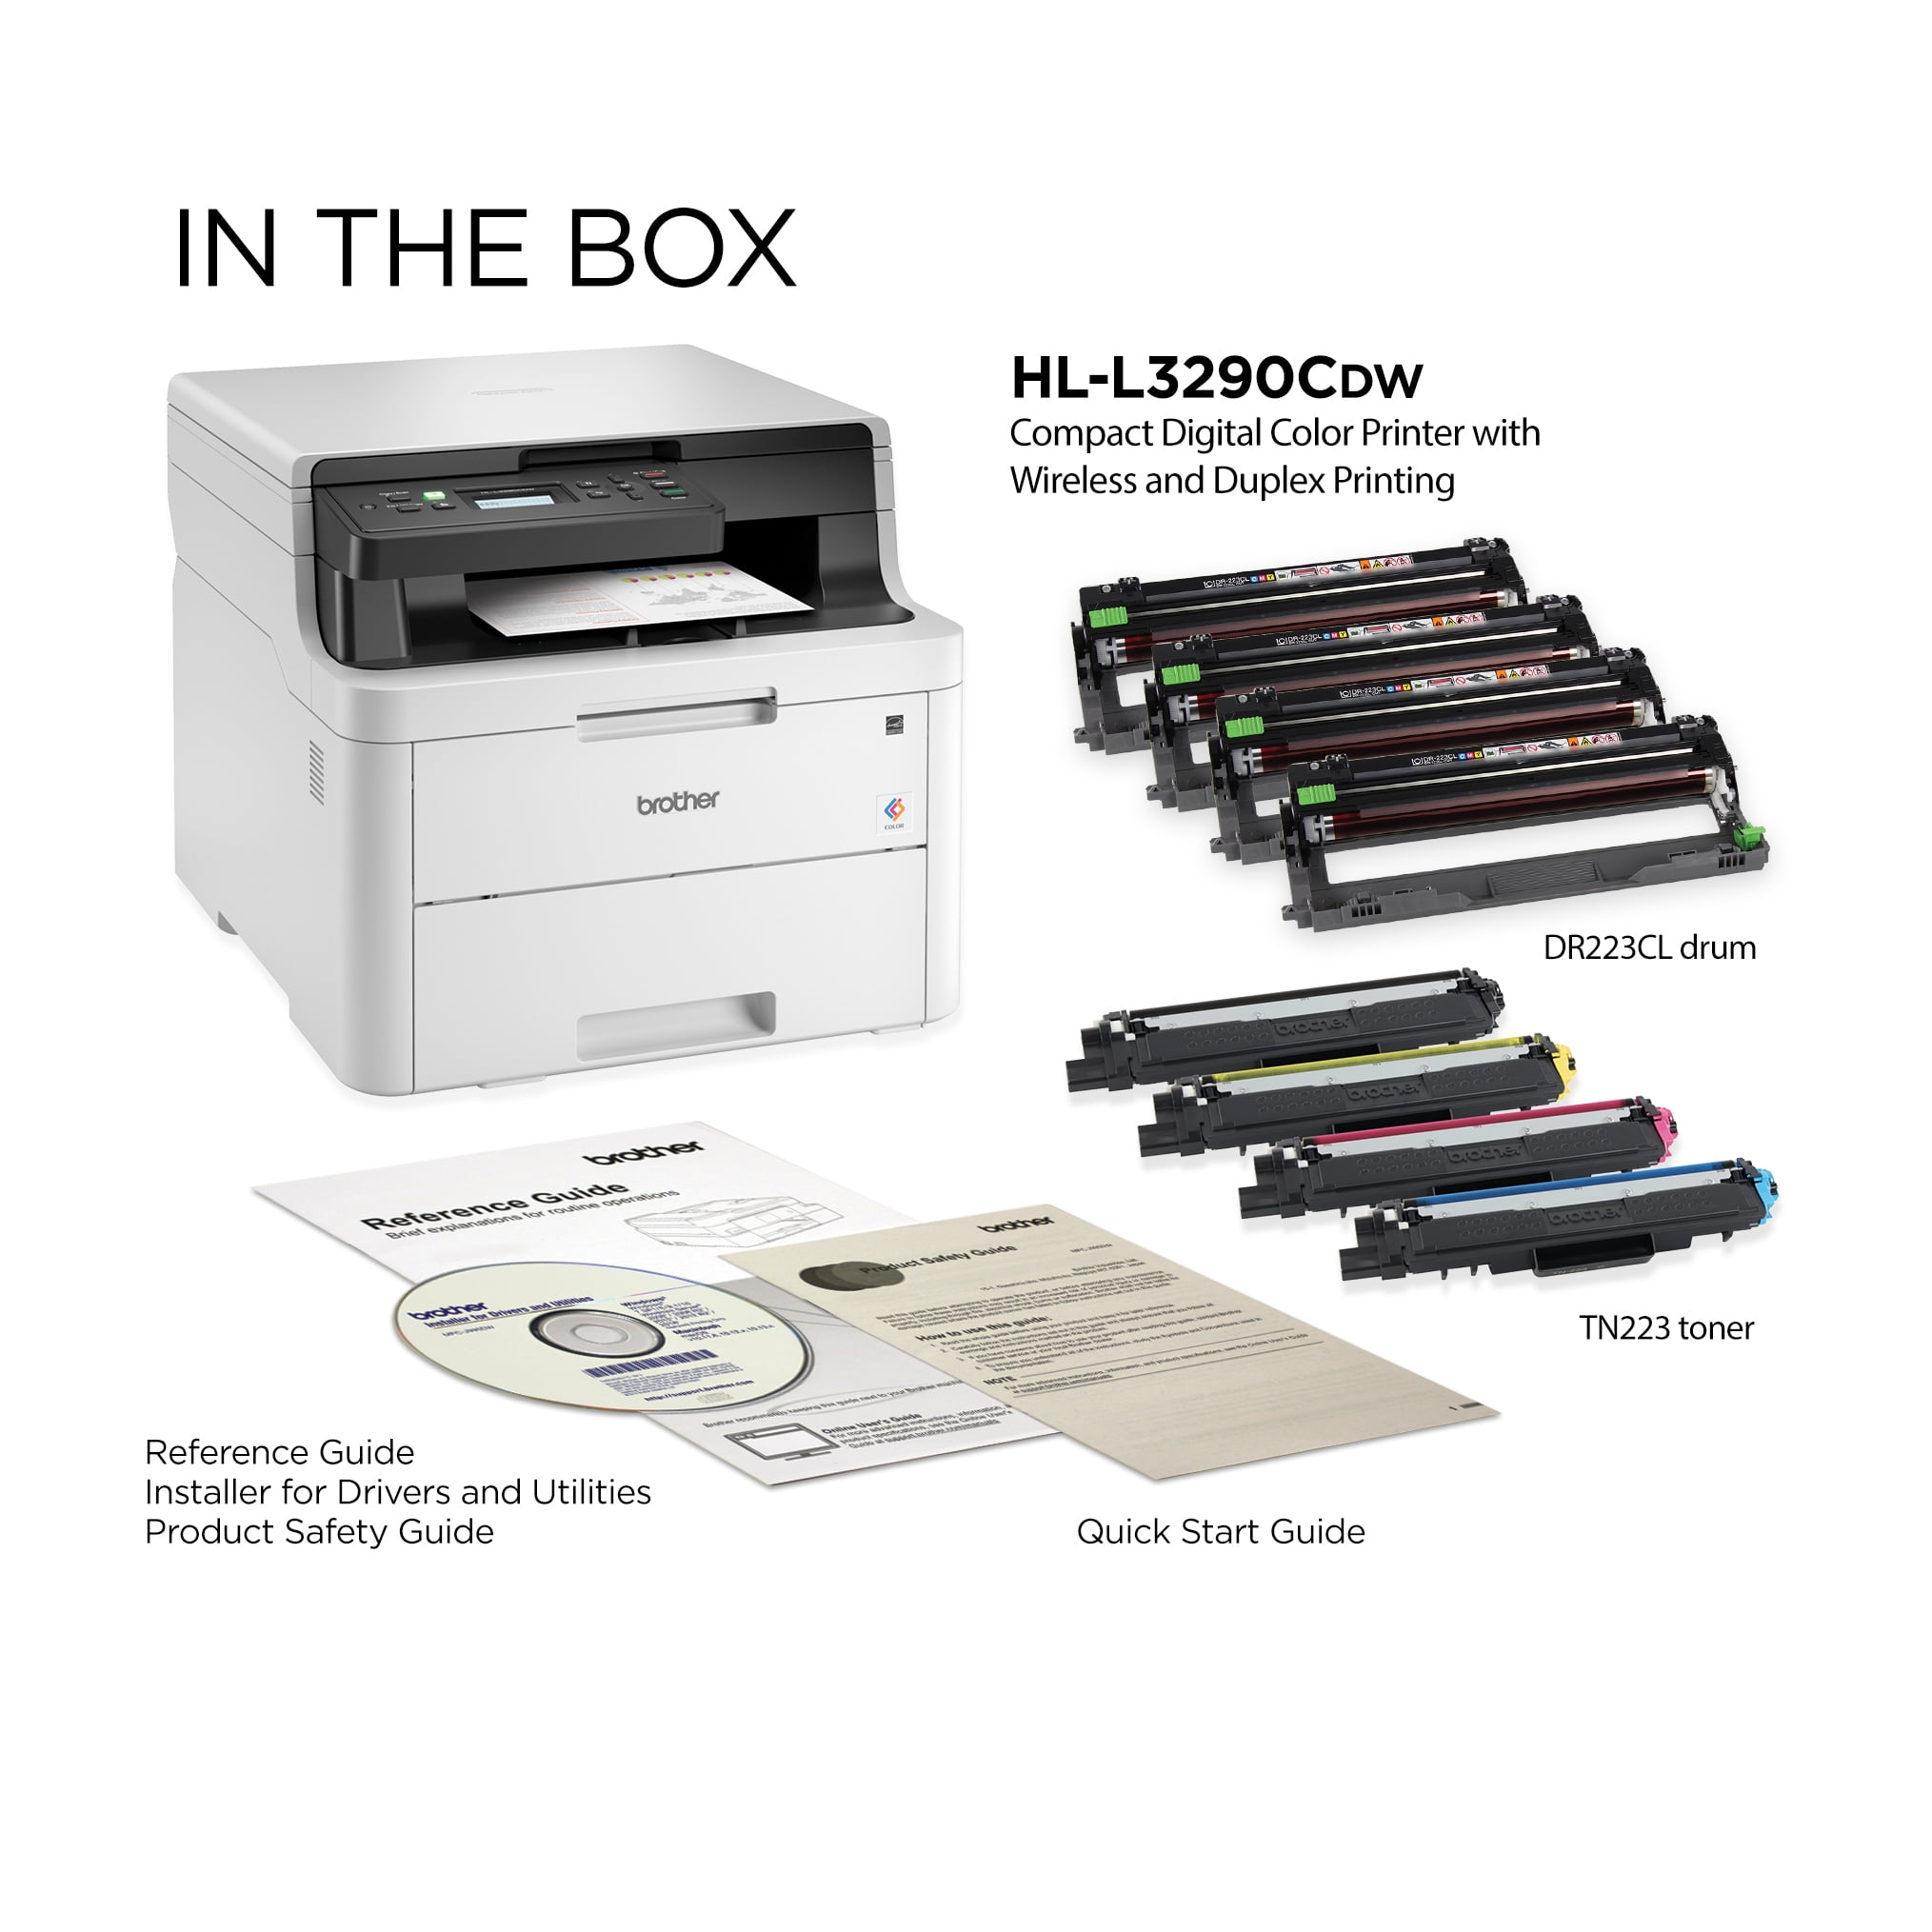 Brother HL-L3290CDW Compact Digital Color Printer Providing Laser Printer  Quality Results with Convenient Flatbed Copy & Scan, Wireless Printing and  